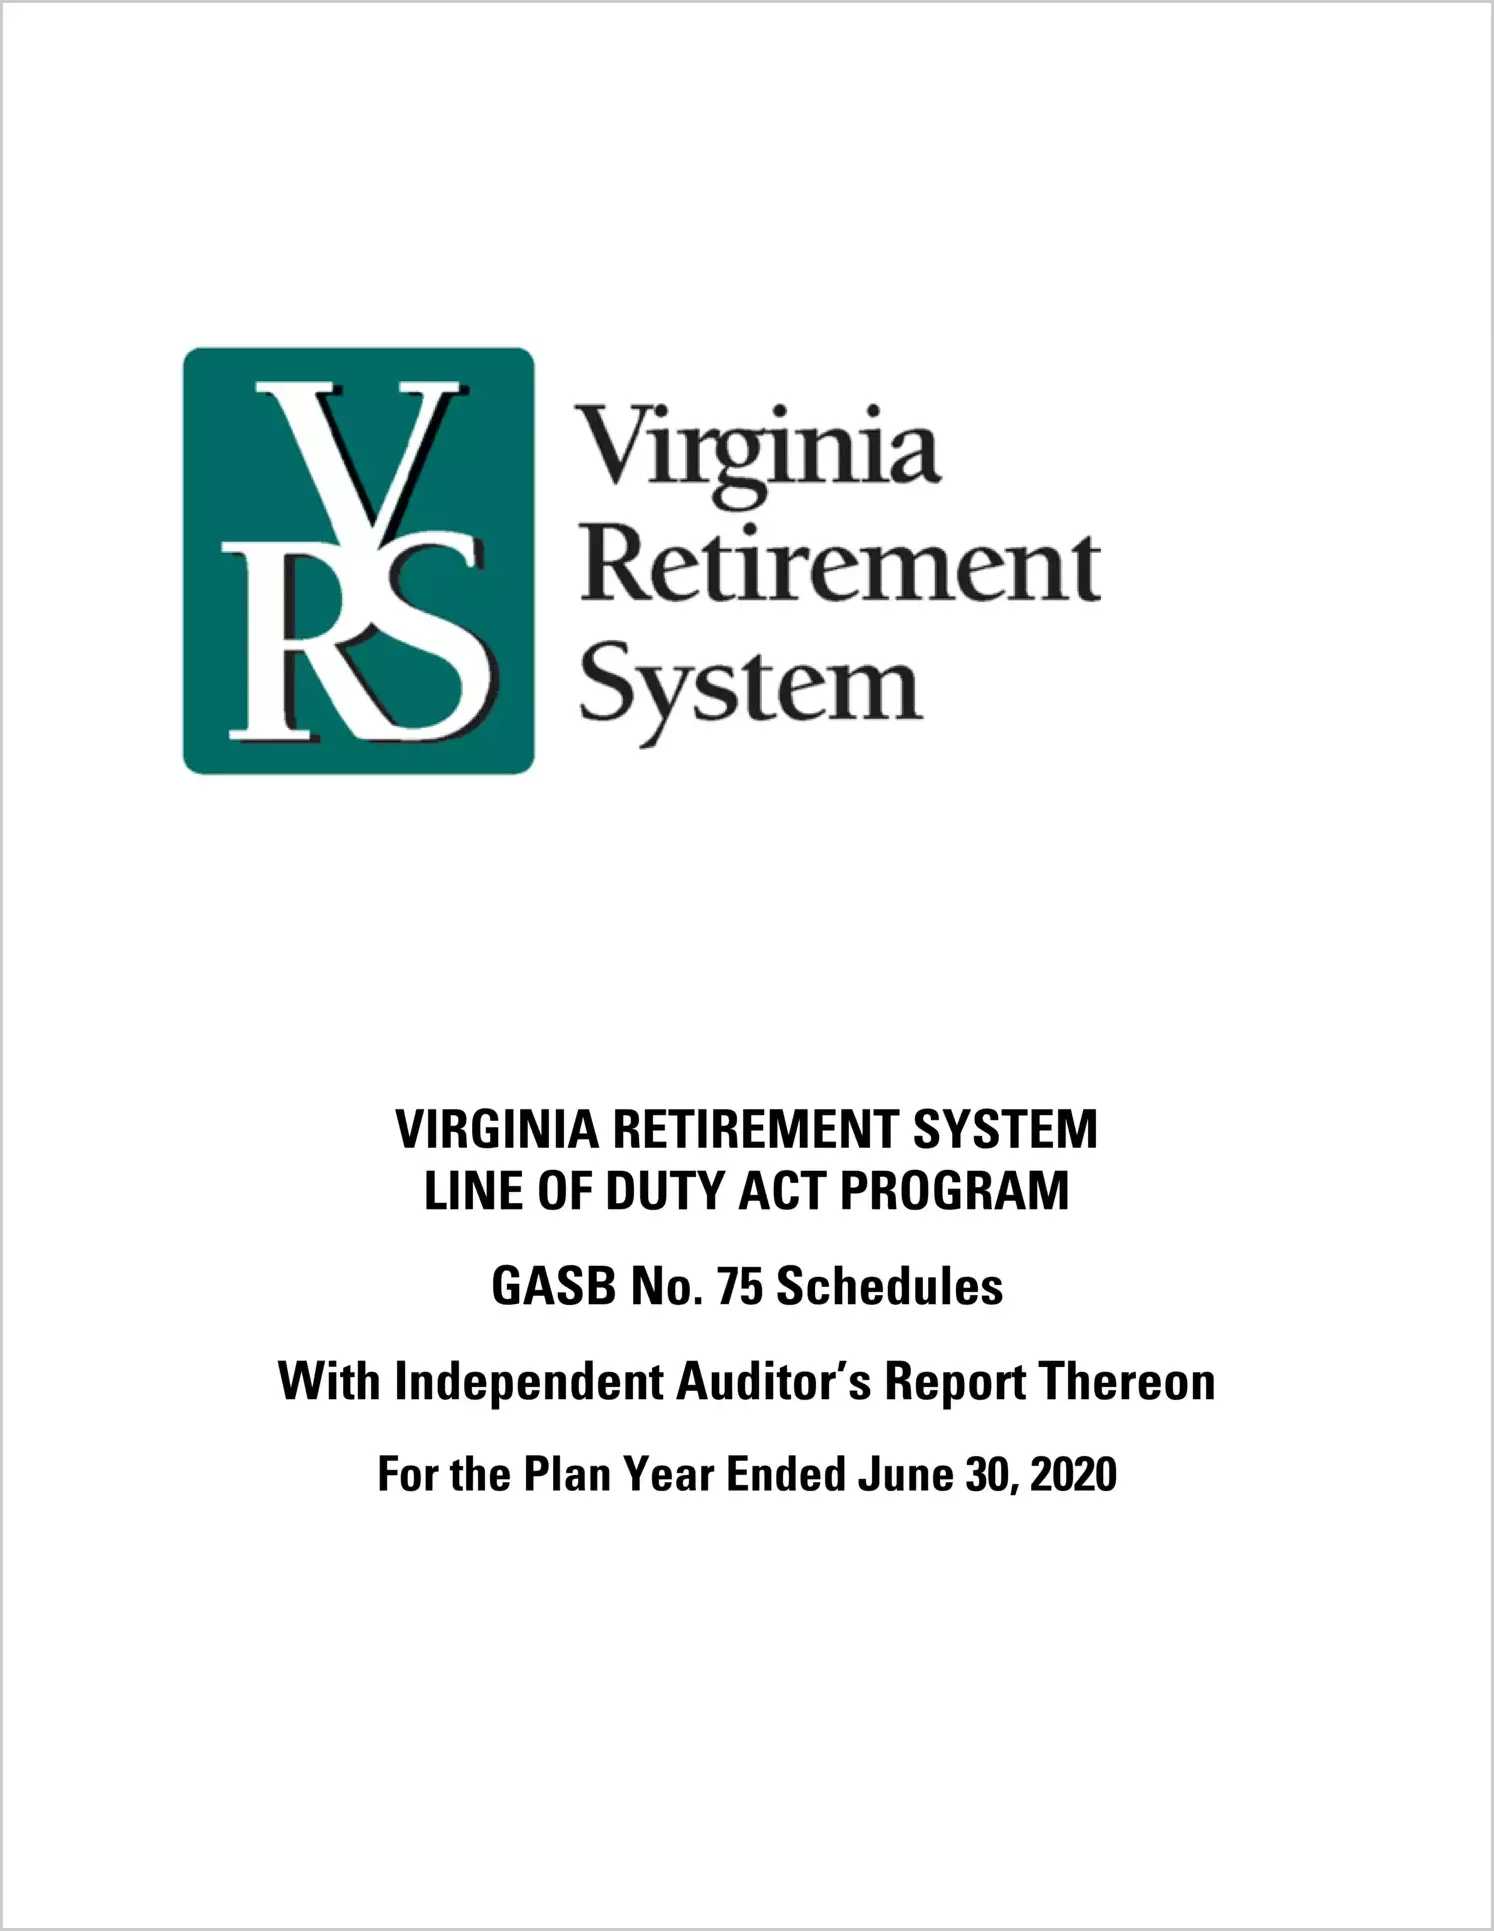 GASB 75 Schedules - Virginia Retirement System Line of Duty Act Program) for the year ended June 30, 2020